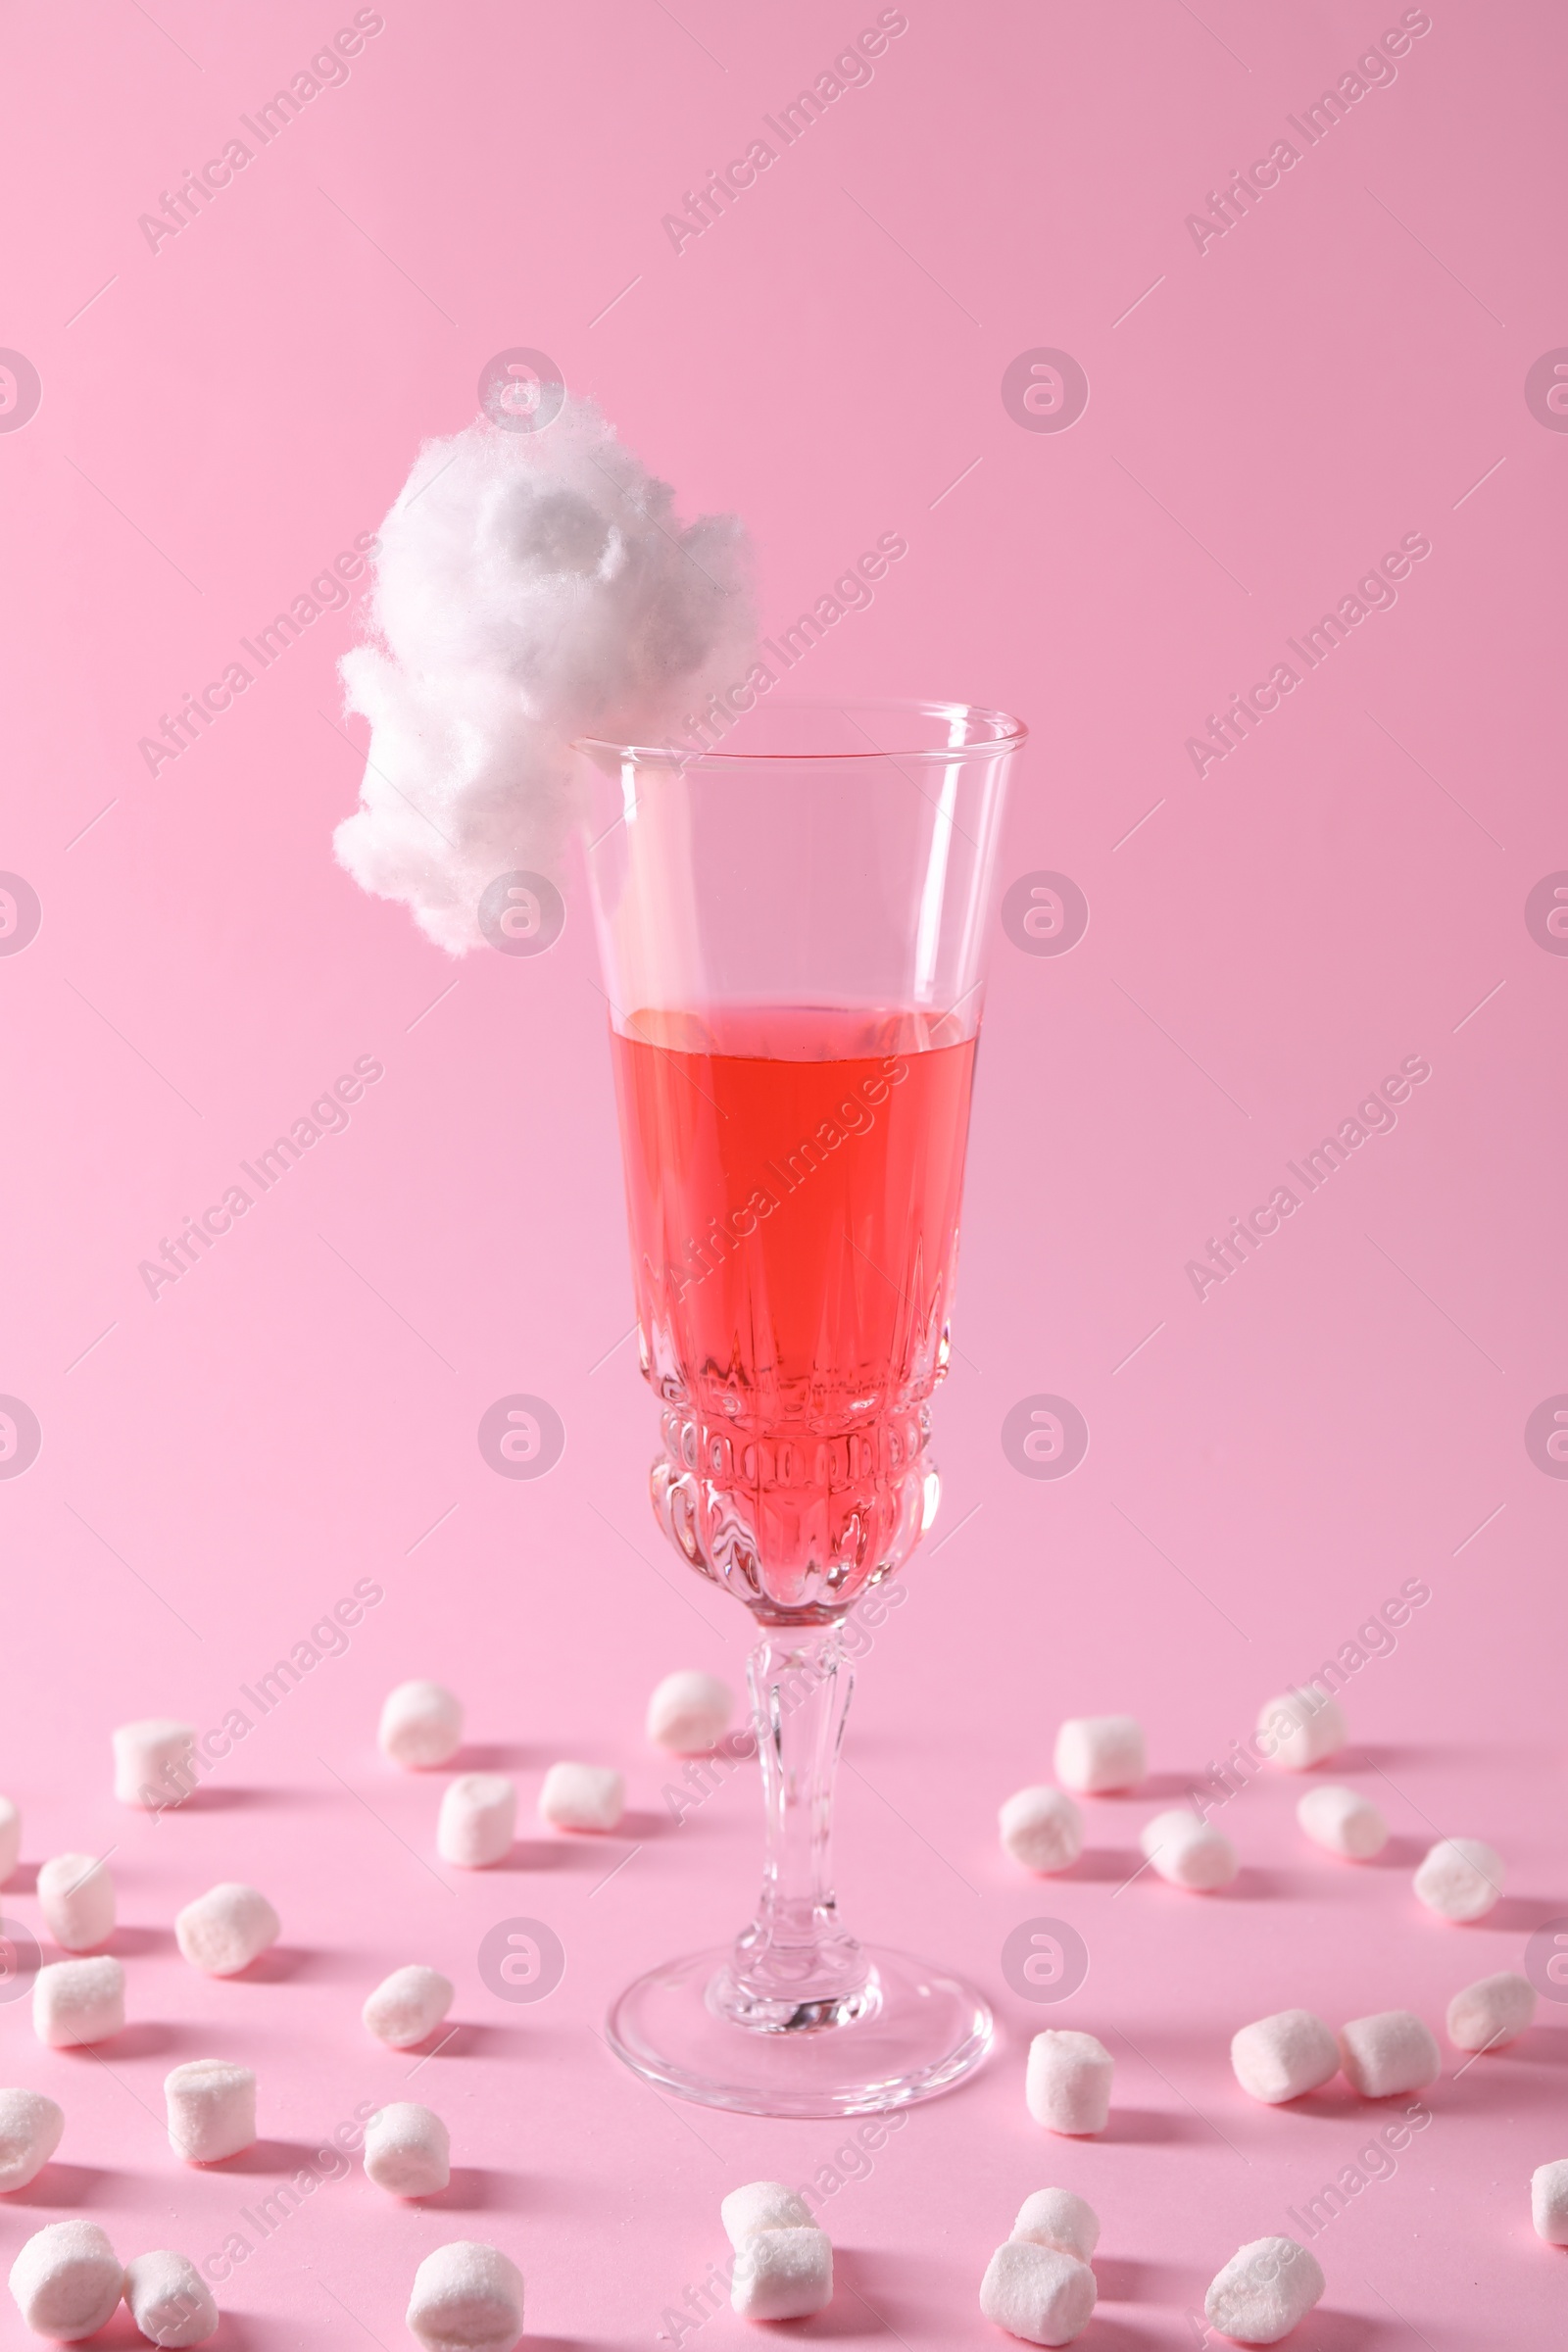 Photo of Tasty cocktail in glass decorated with cotton candy and marshmallows on pink background